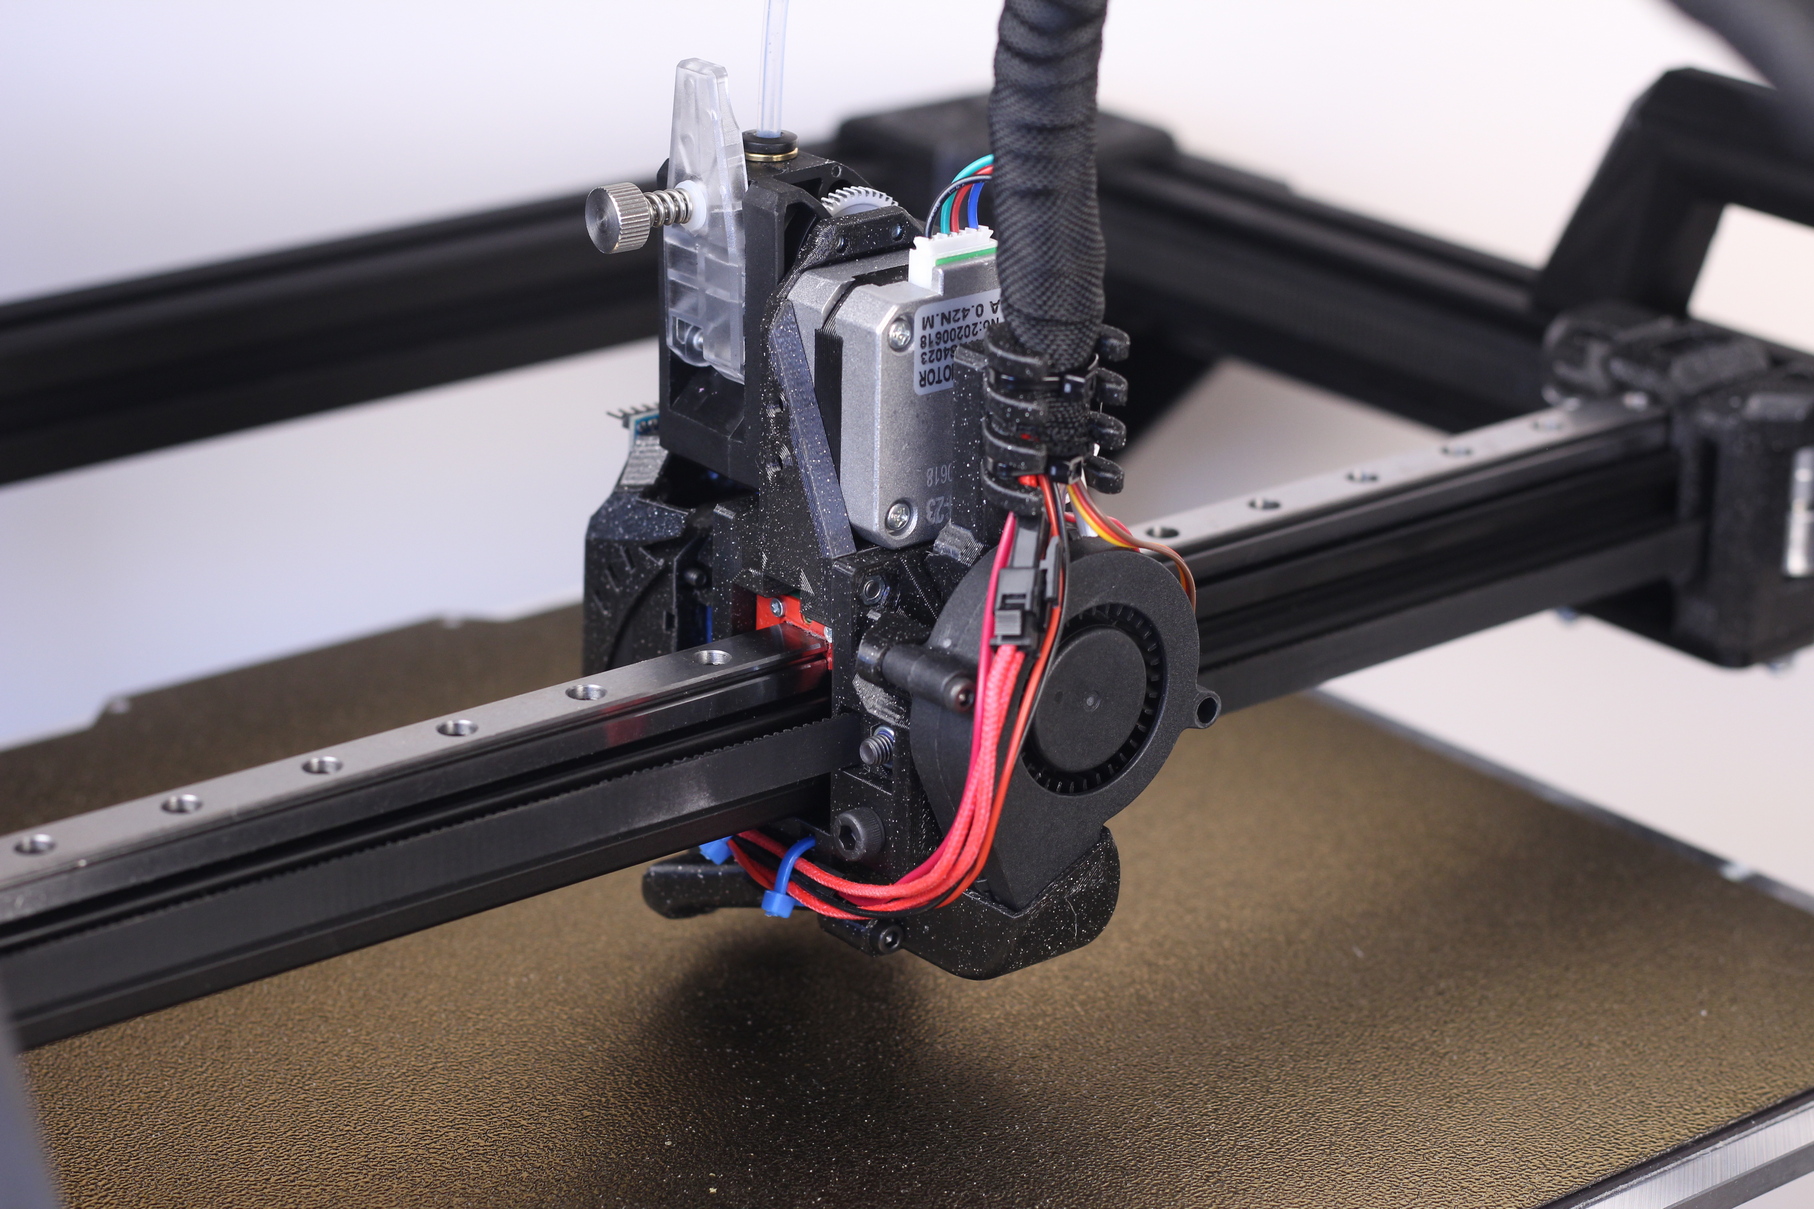 RatRig V Core 3 EVA mount with BMG and Dragonfly HIC 5 | RatRig V-Core 3 Review: Premium CoreXY 3D Printer Kit